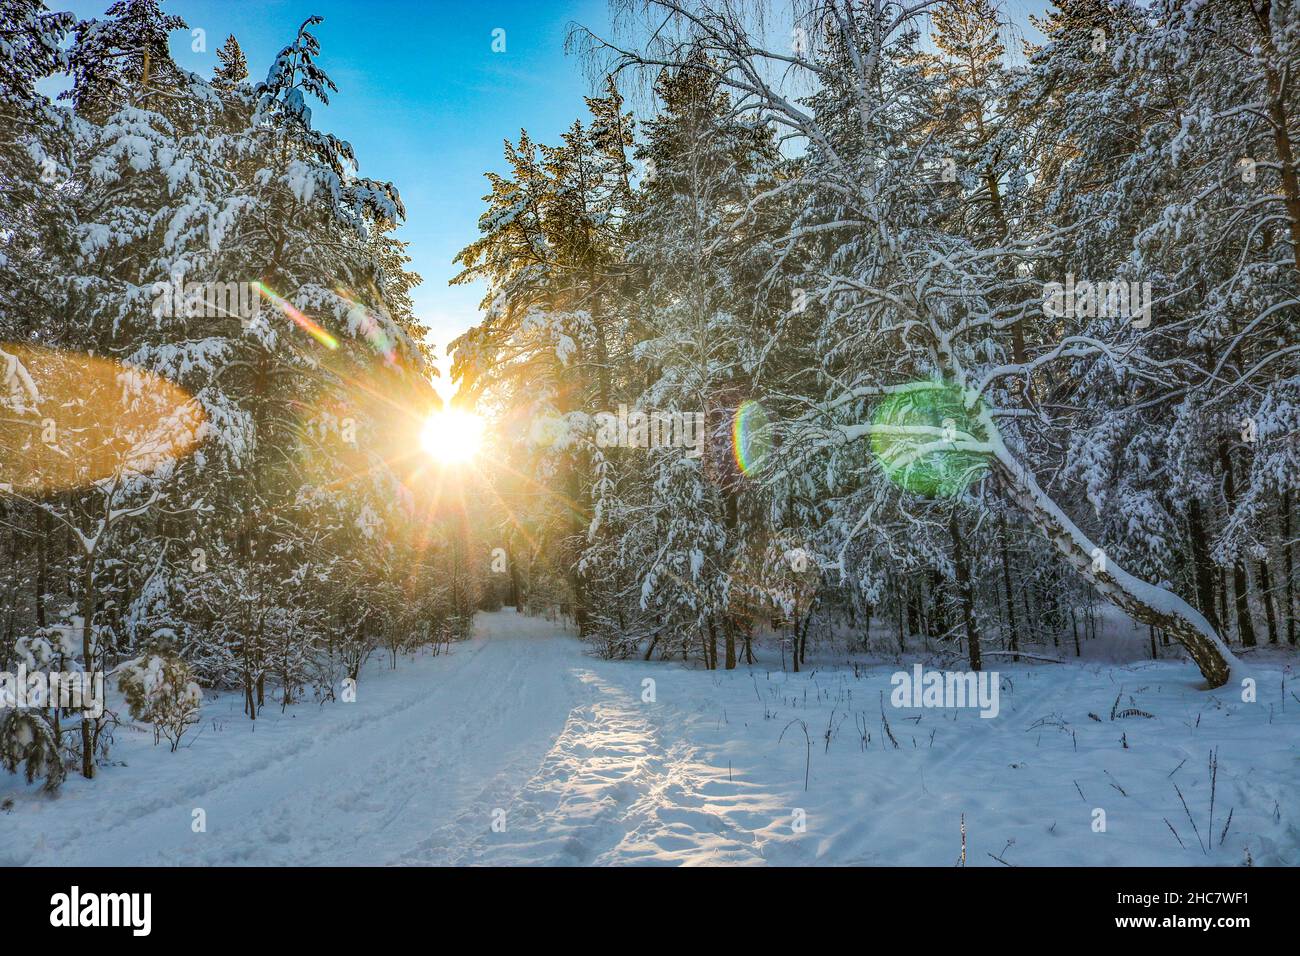 Winter forest covered with snow and low sun with bright rays. Stock Photo